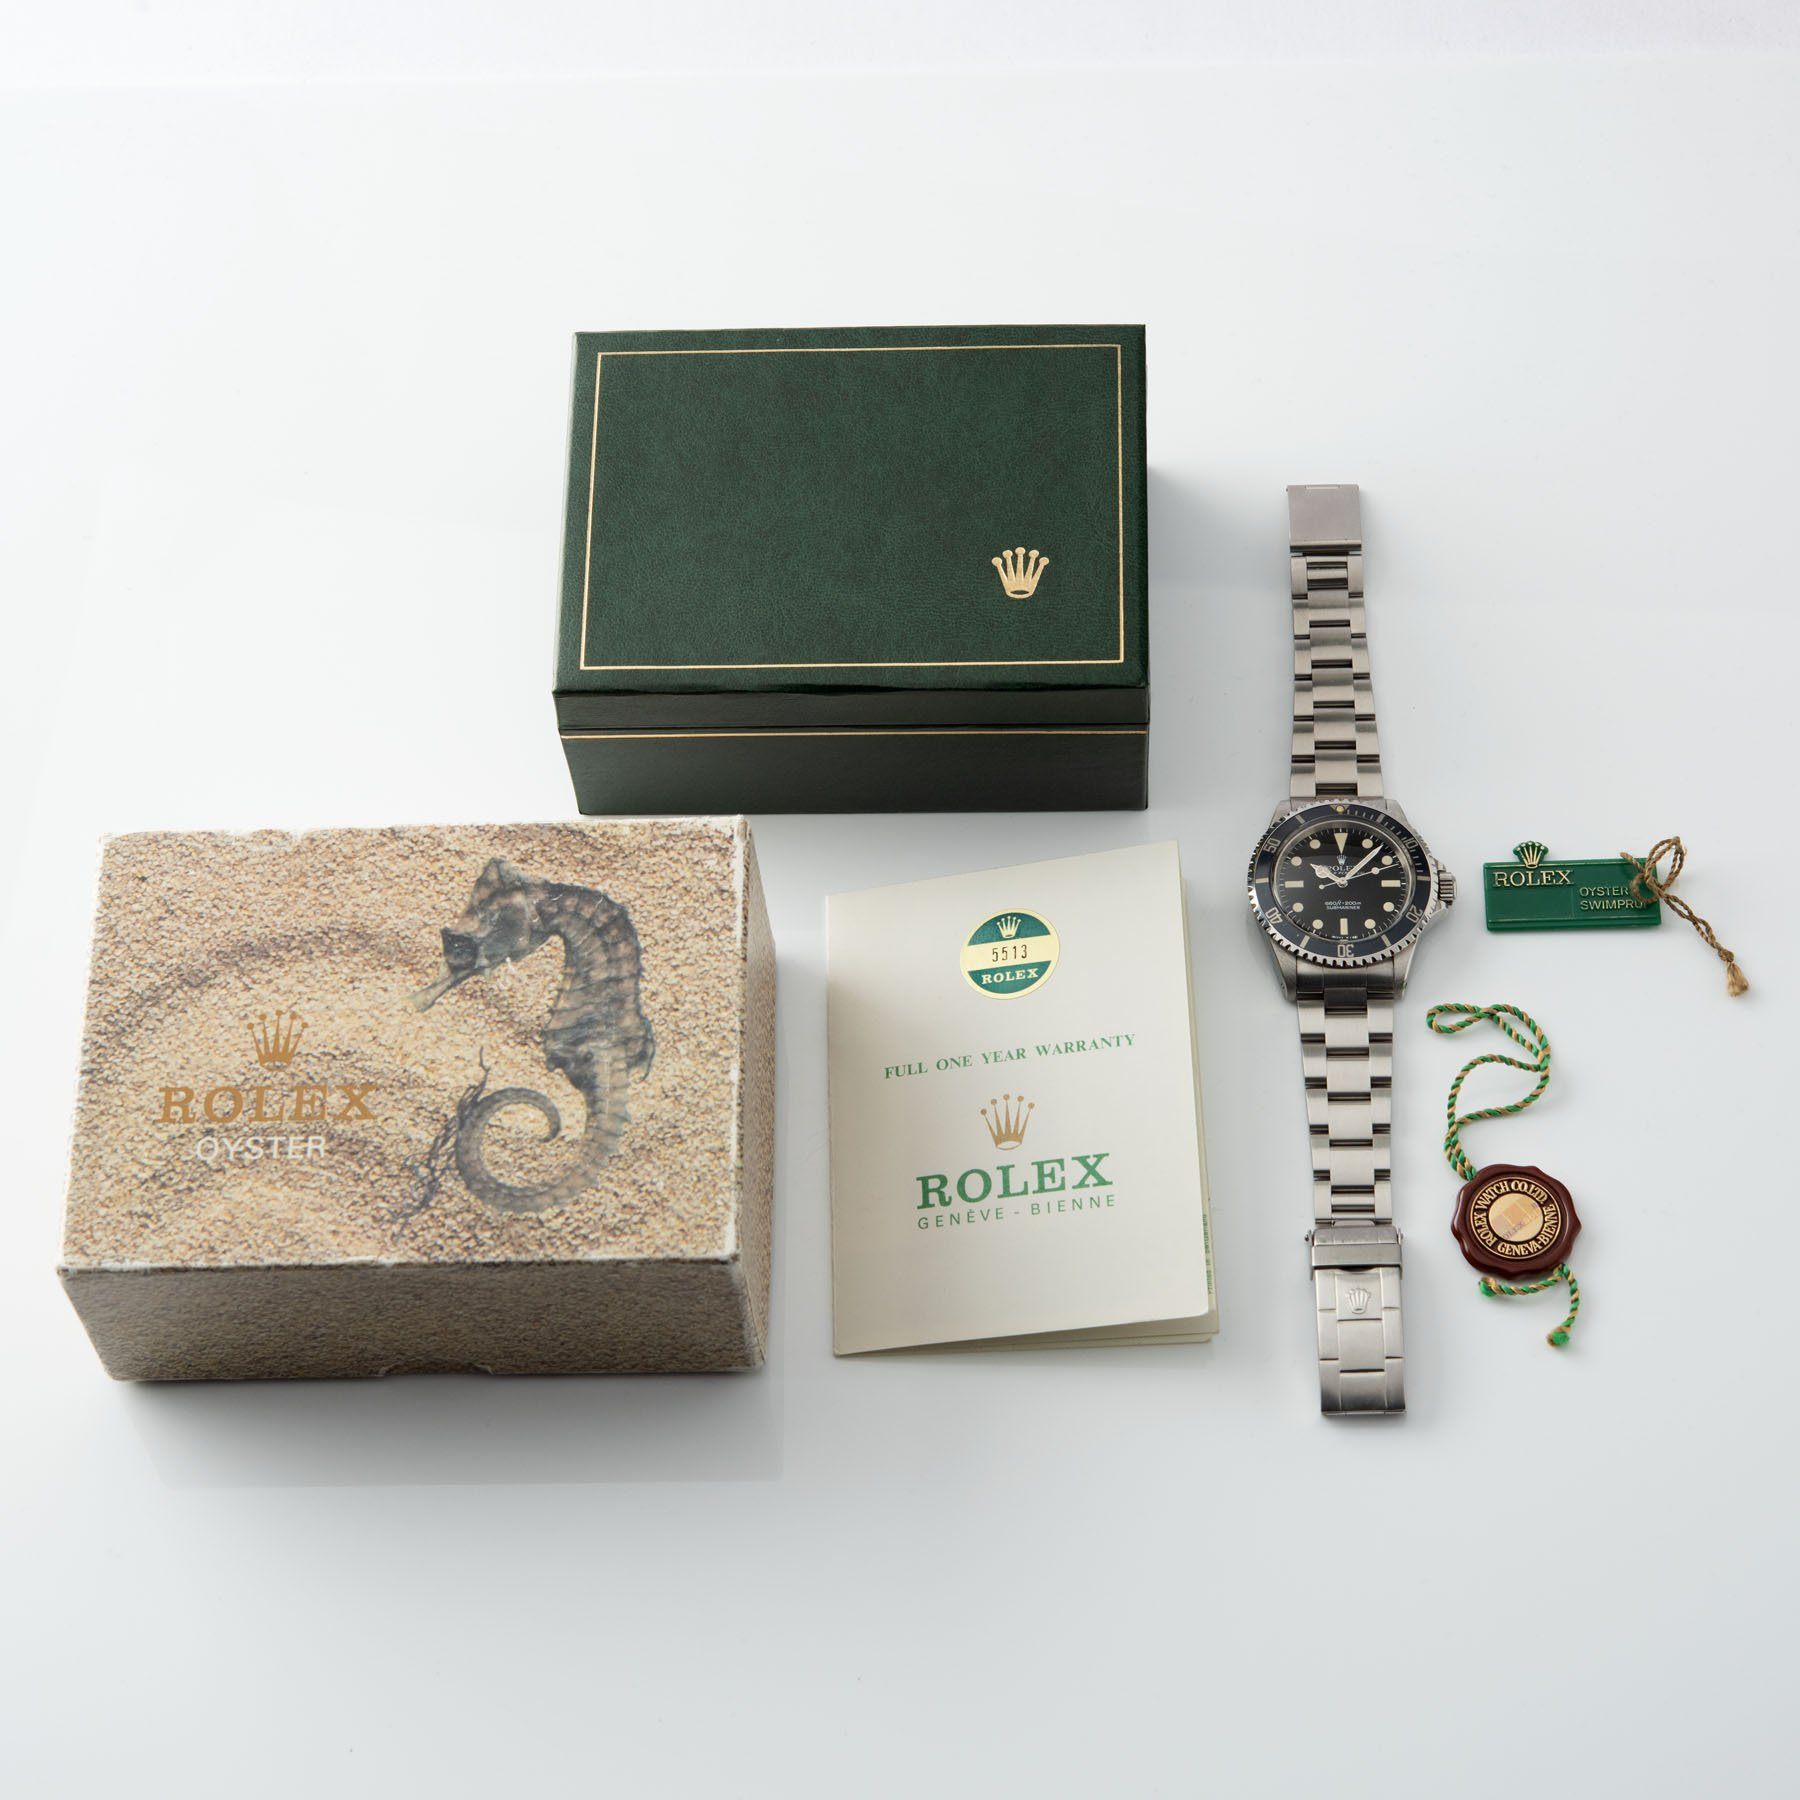 Rolex Submariner Mk 1 Maxi 5513 with inner and out boxes, US papers and hangtag